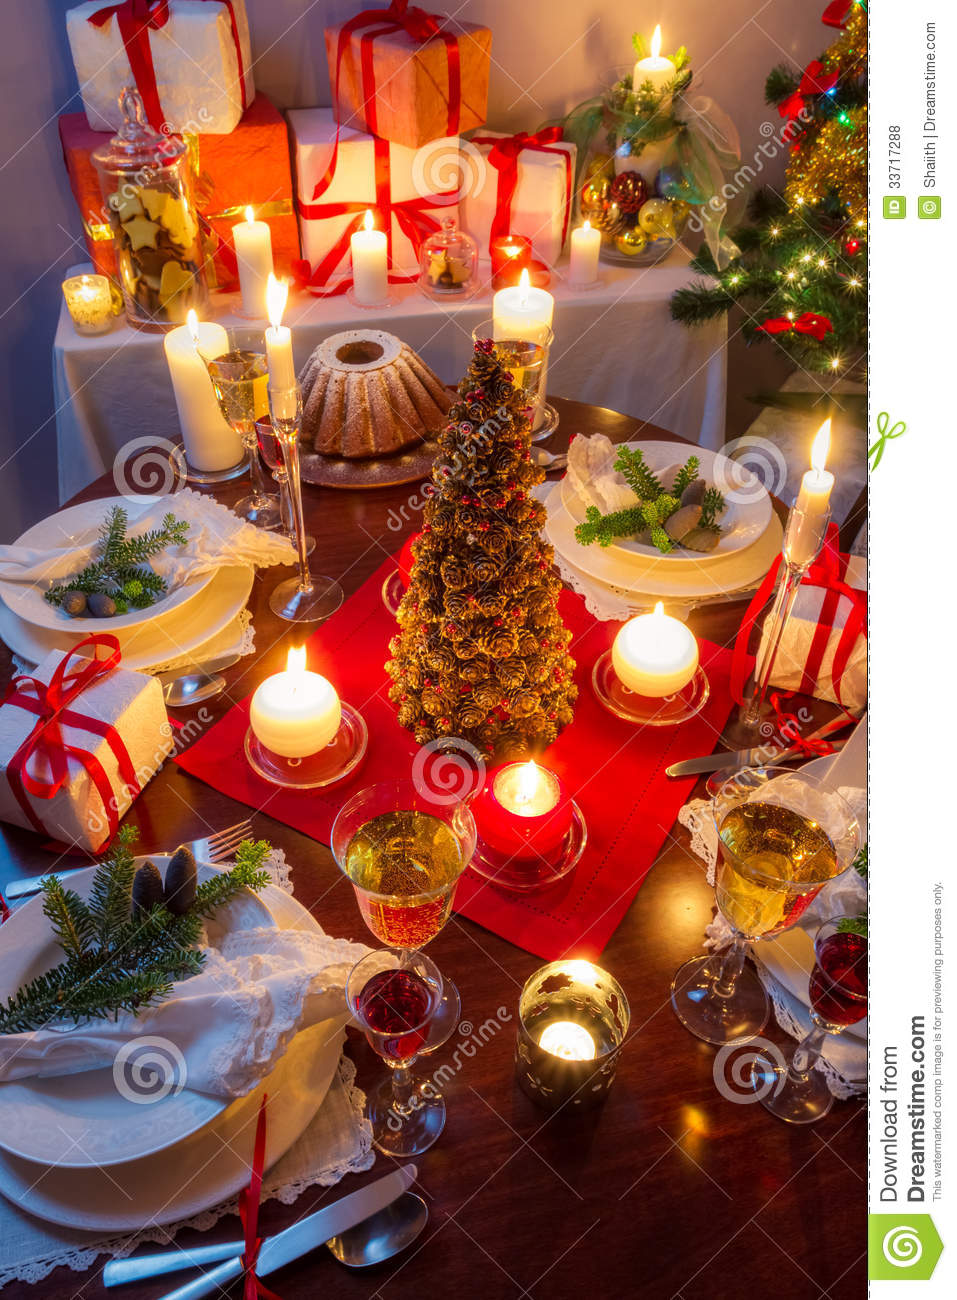 Dinning Room At Christmas Eve Royalty Free Stock Photos   Image    